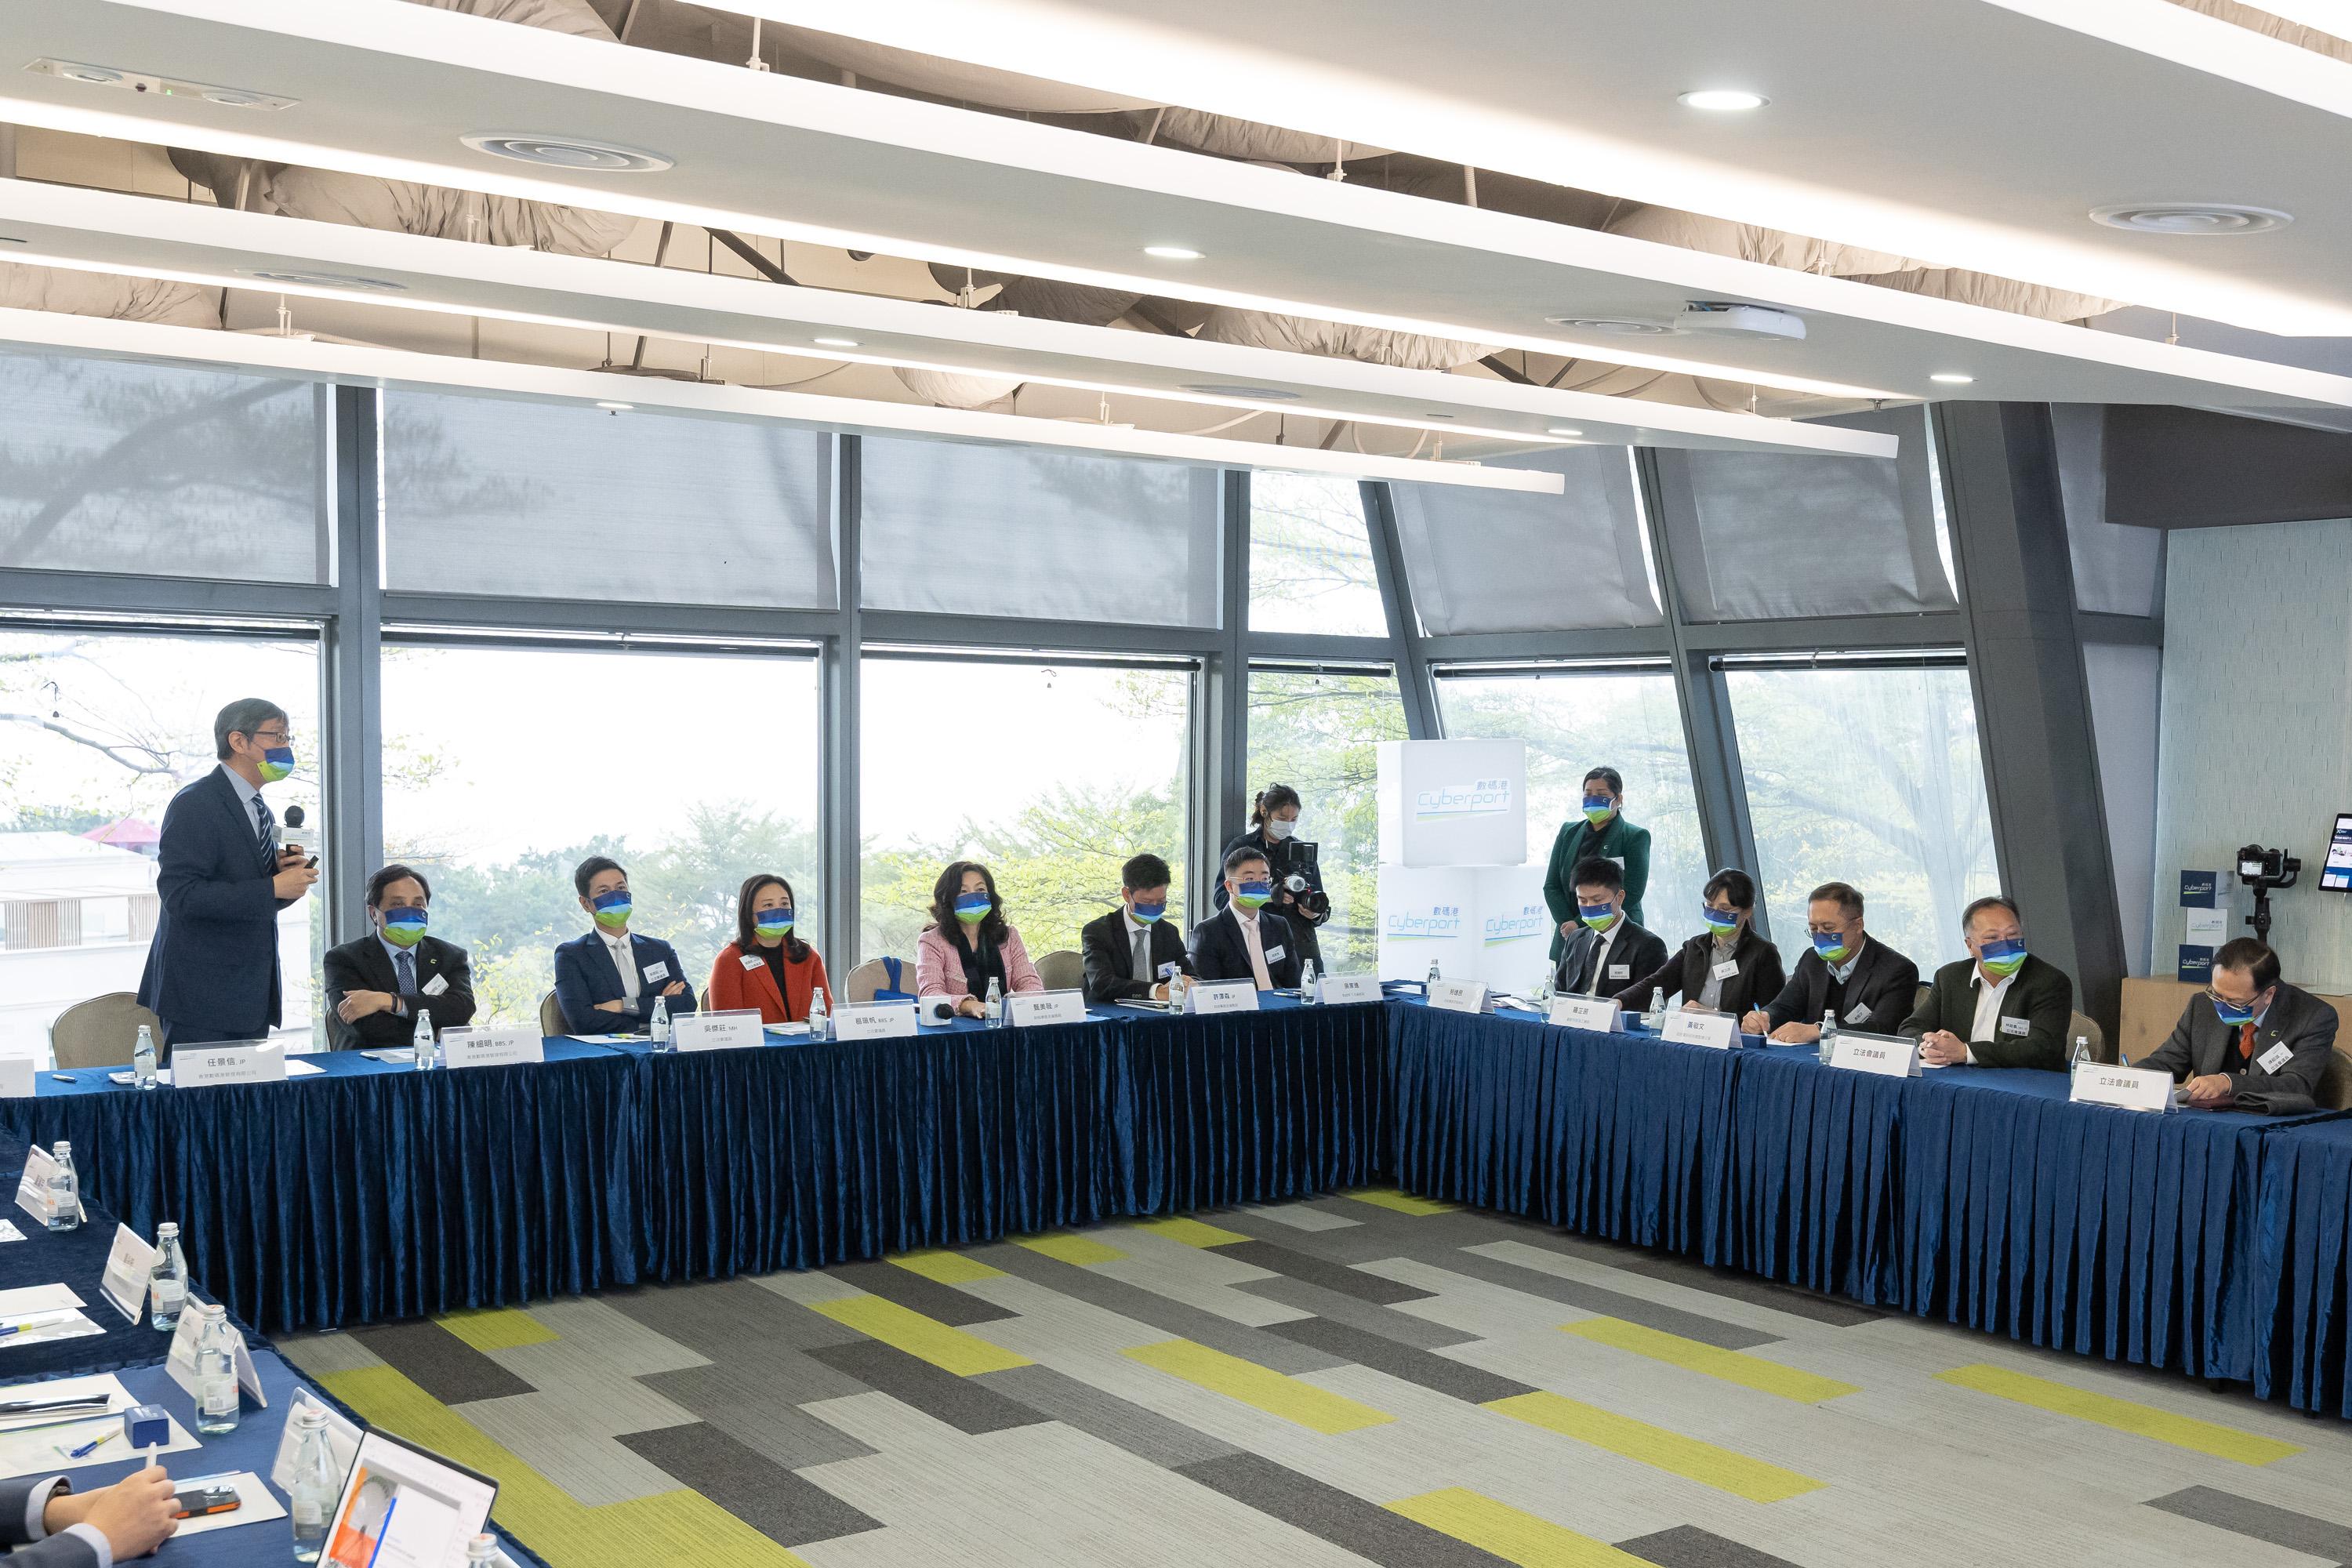 The Legislative Council (LegCo) Subcommittee on Matters Relating to the Development of Smart City visits financial technology (FinTech) and regulatory technology (RegTech) entities at Cyberport today (January 9). Photo shows the Chairman of the Subcommittee, Ms Elizabeth Quat (fourth left); the Deputy Chairman of the Subcommittee, Dr Johnny Ng (third left); and other LegCo Members receiving a briefing by representatives of the Hong Kong Cyberport Management Company Limited on the latest overview of Cyberport.